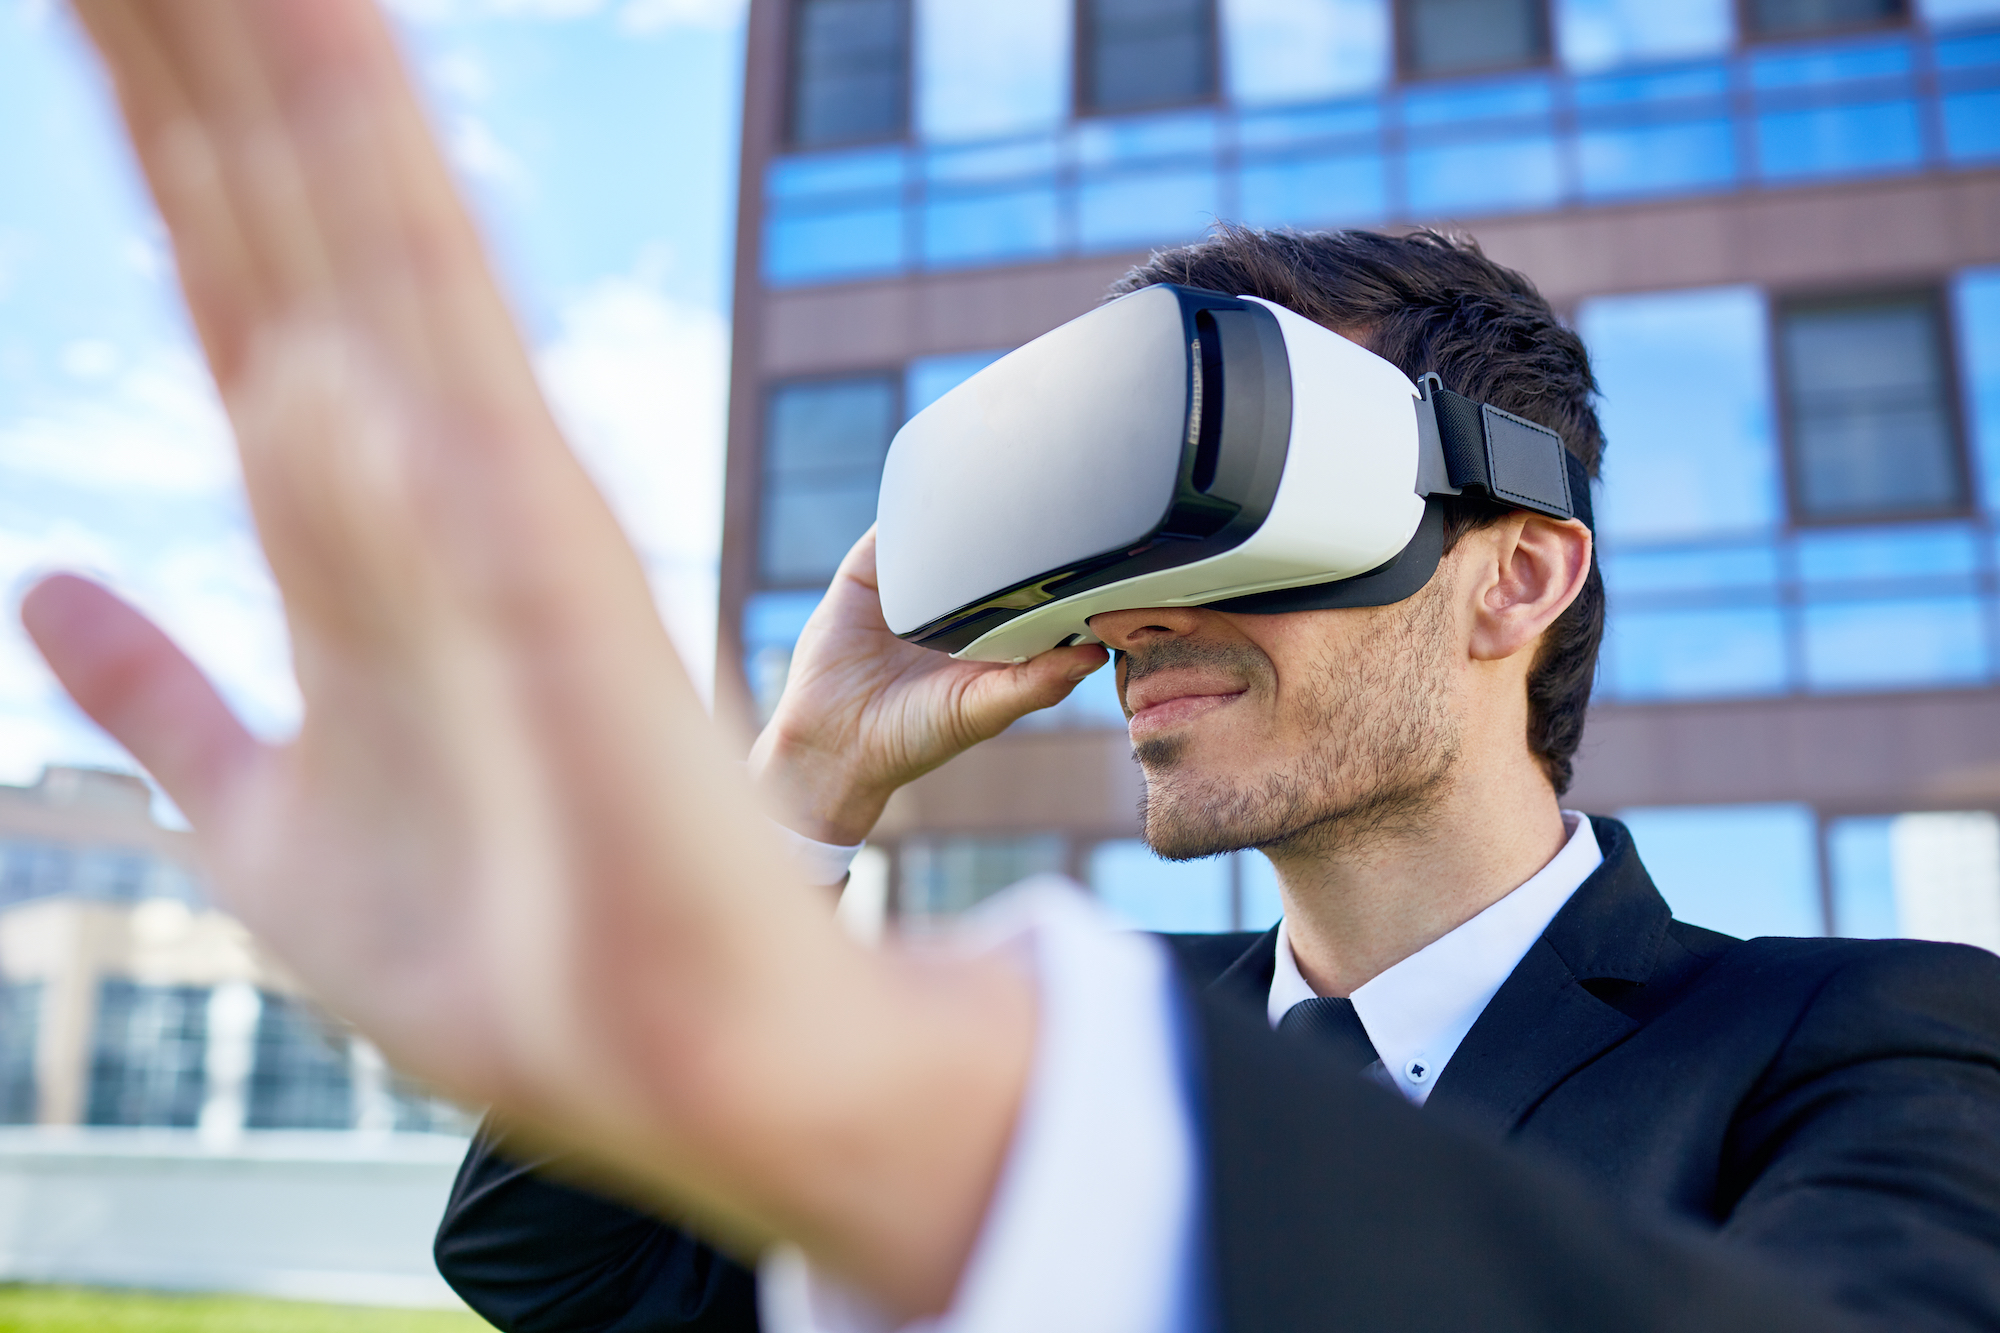 4 Emerging Technology Trends You Can Expect to See in 2021 - WesTec